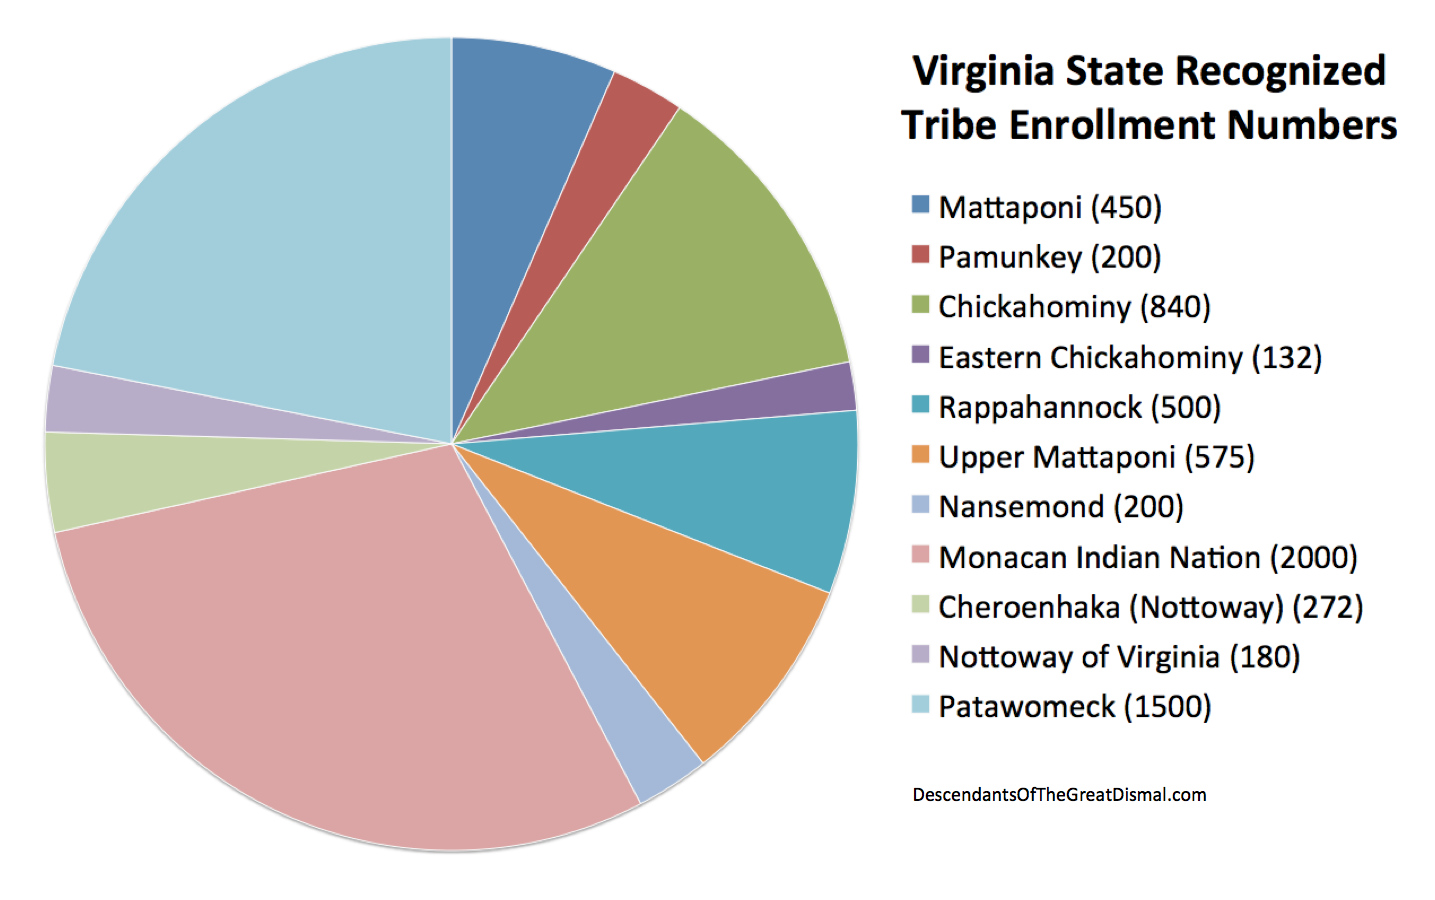 Virginia State Recognized Tribe Enrollment Numbers.png